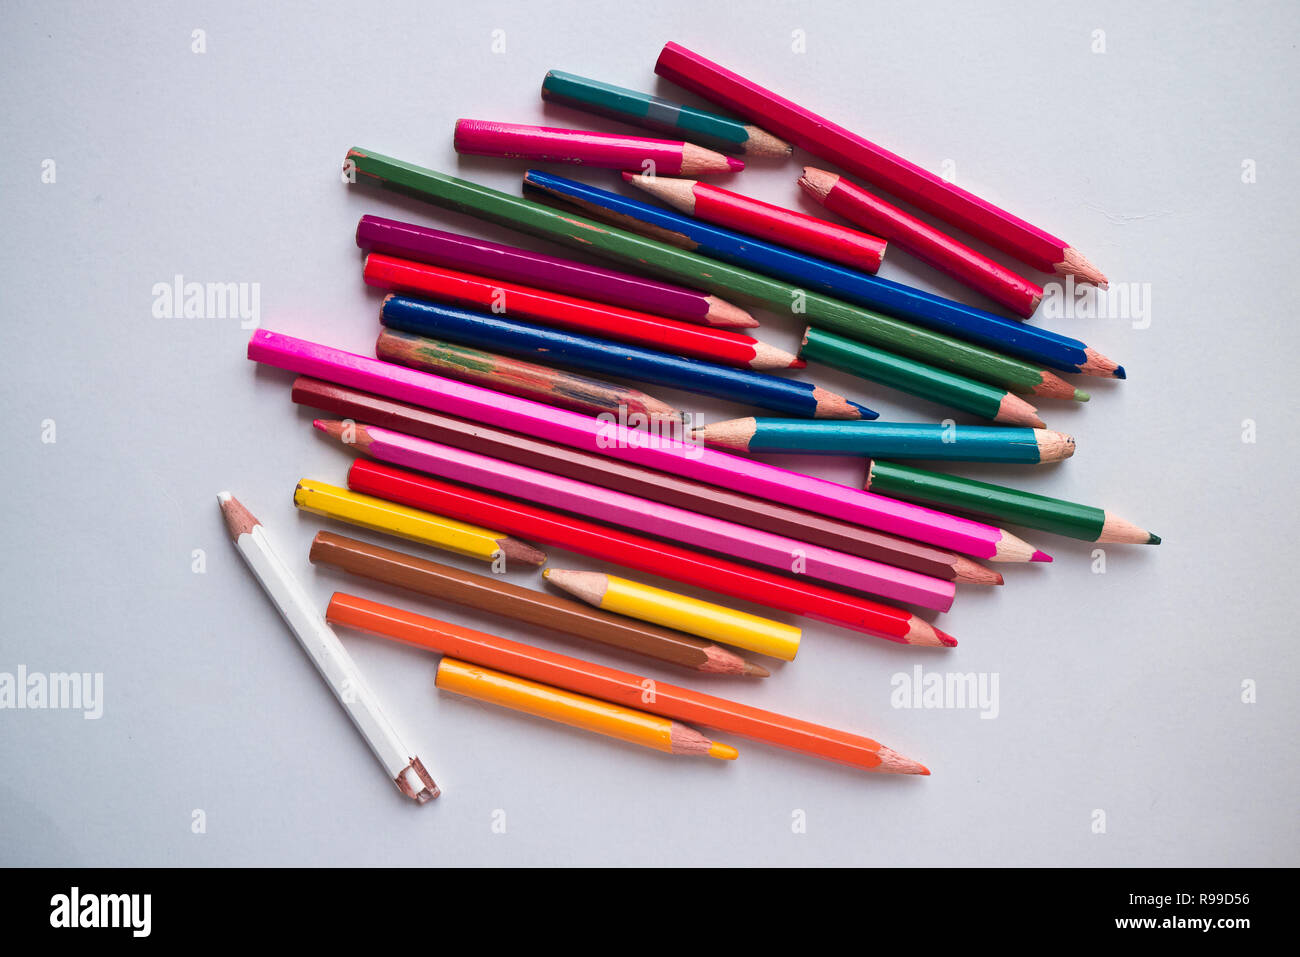 the colored pencils used on a white background. Stock Photo